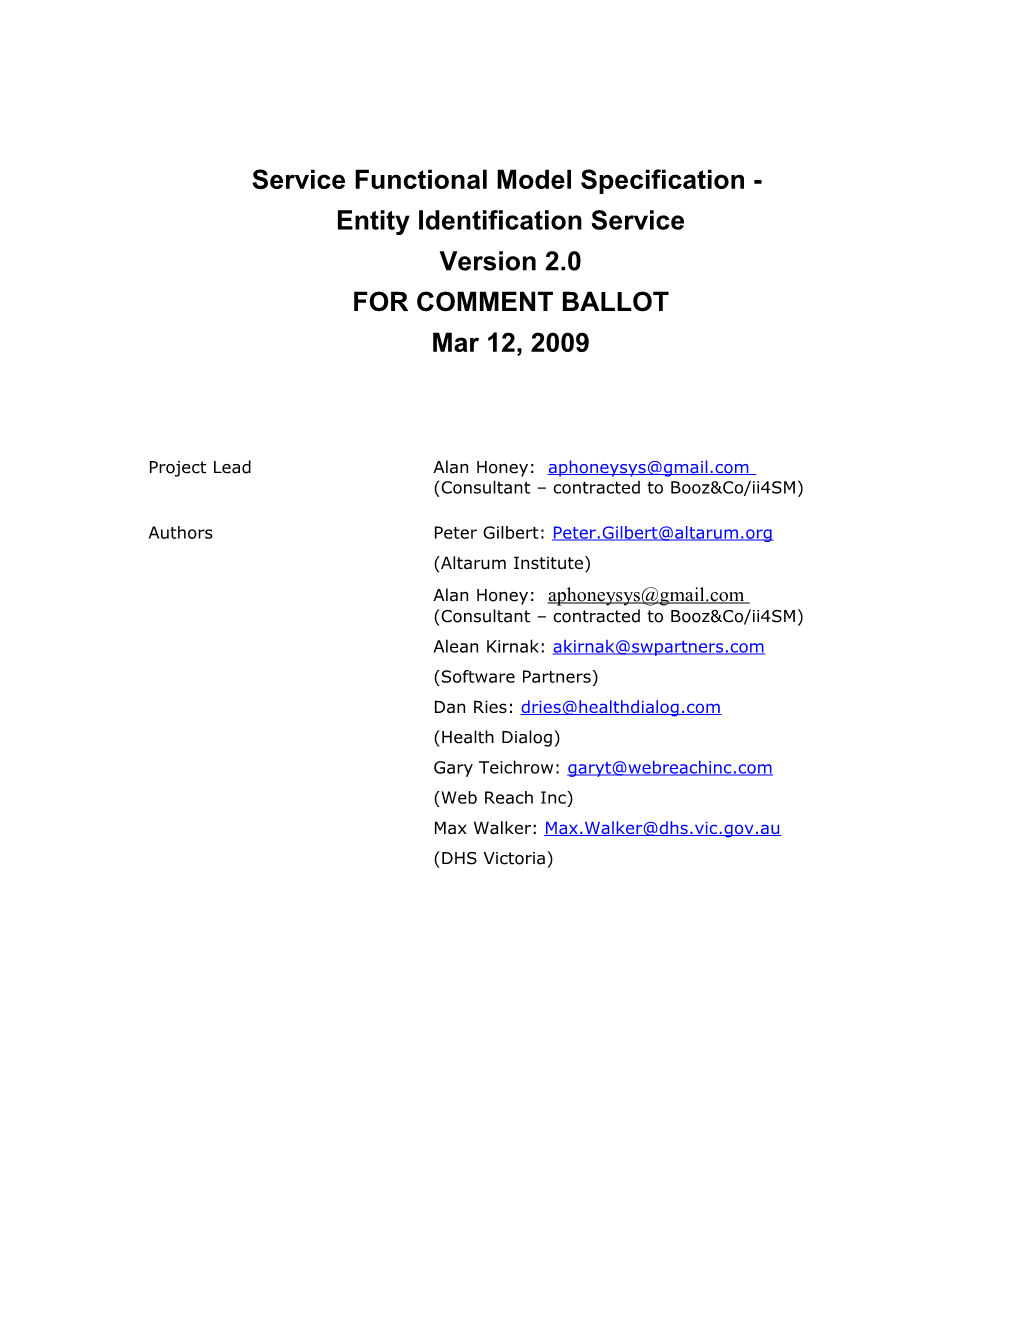 Service Functional Model Style Guide